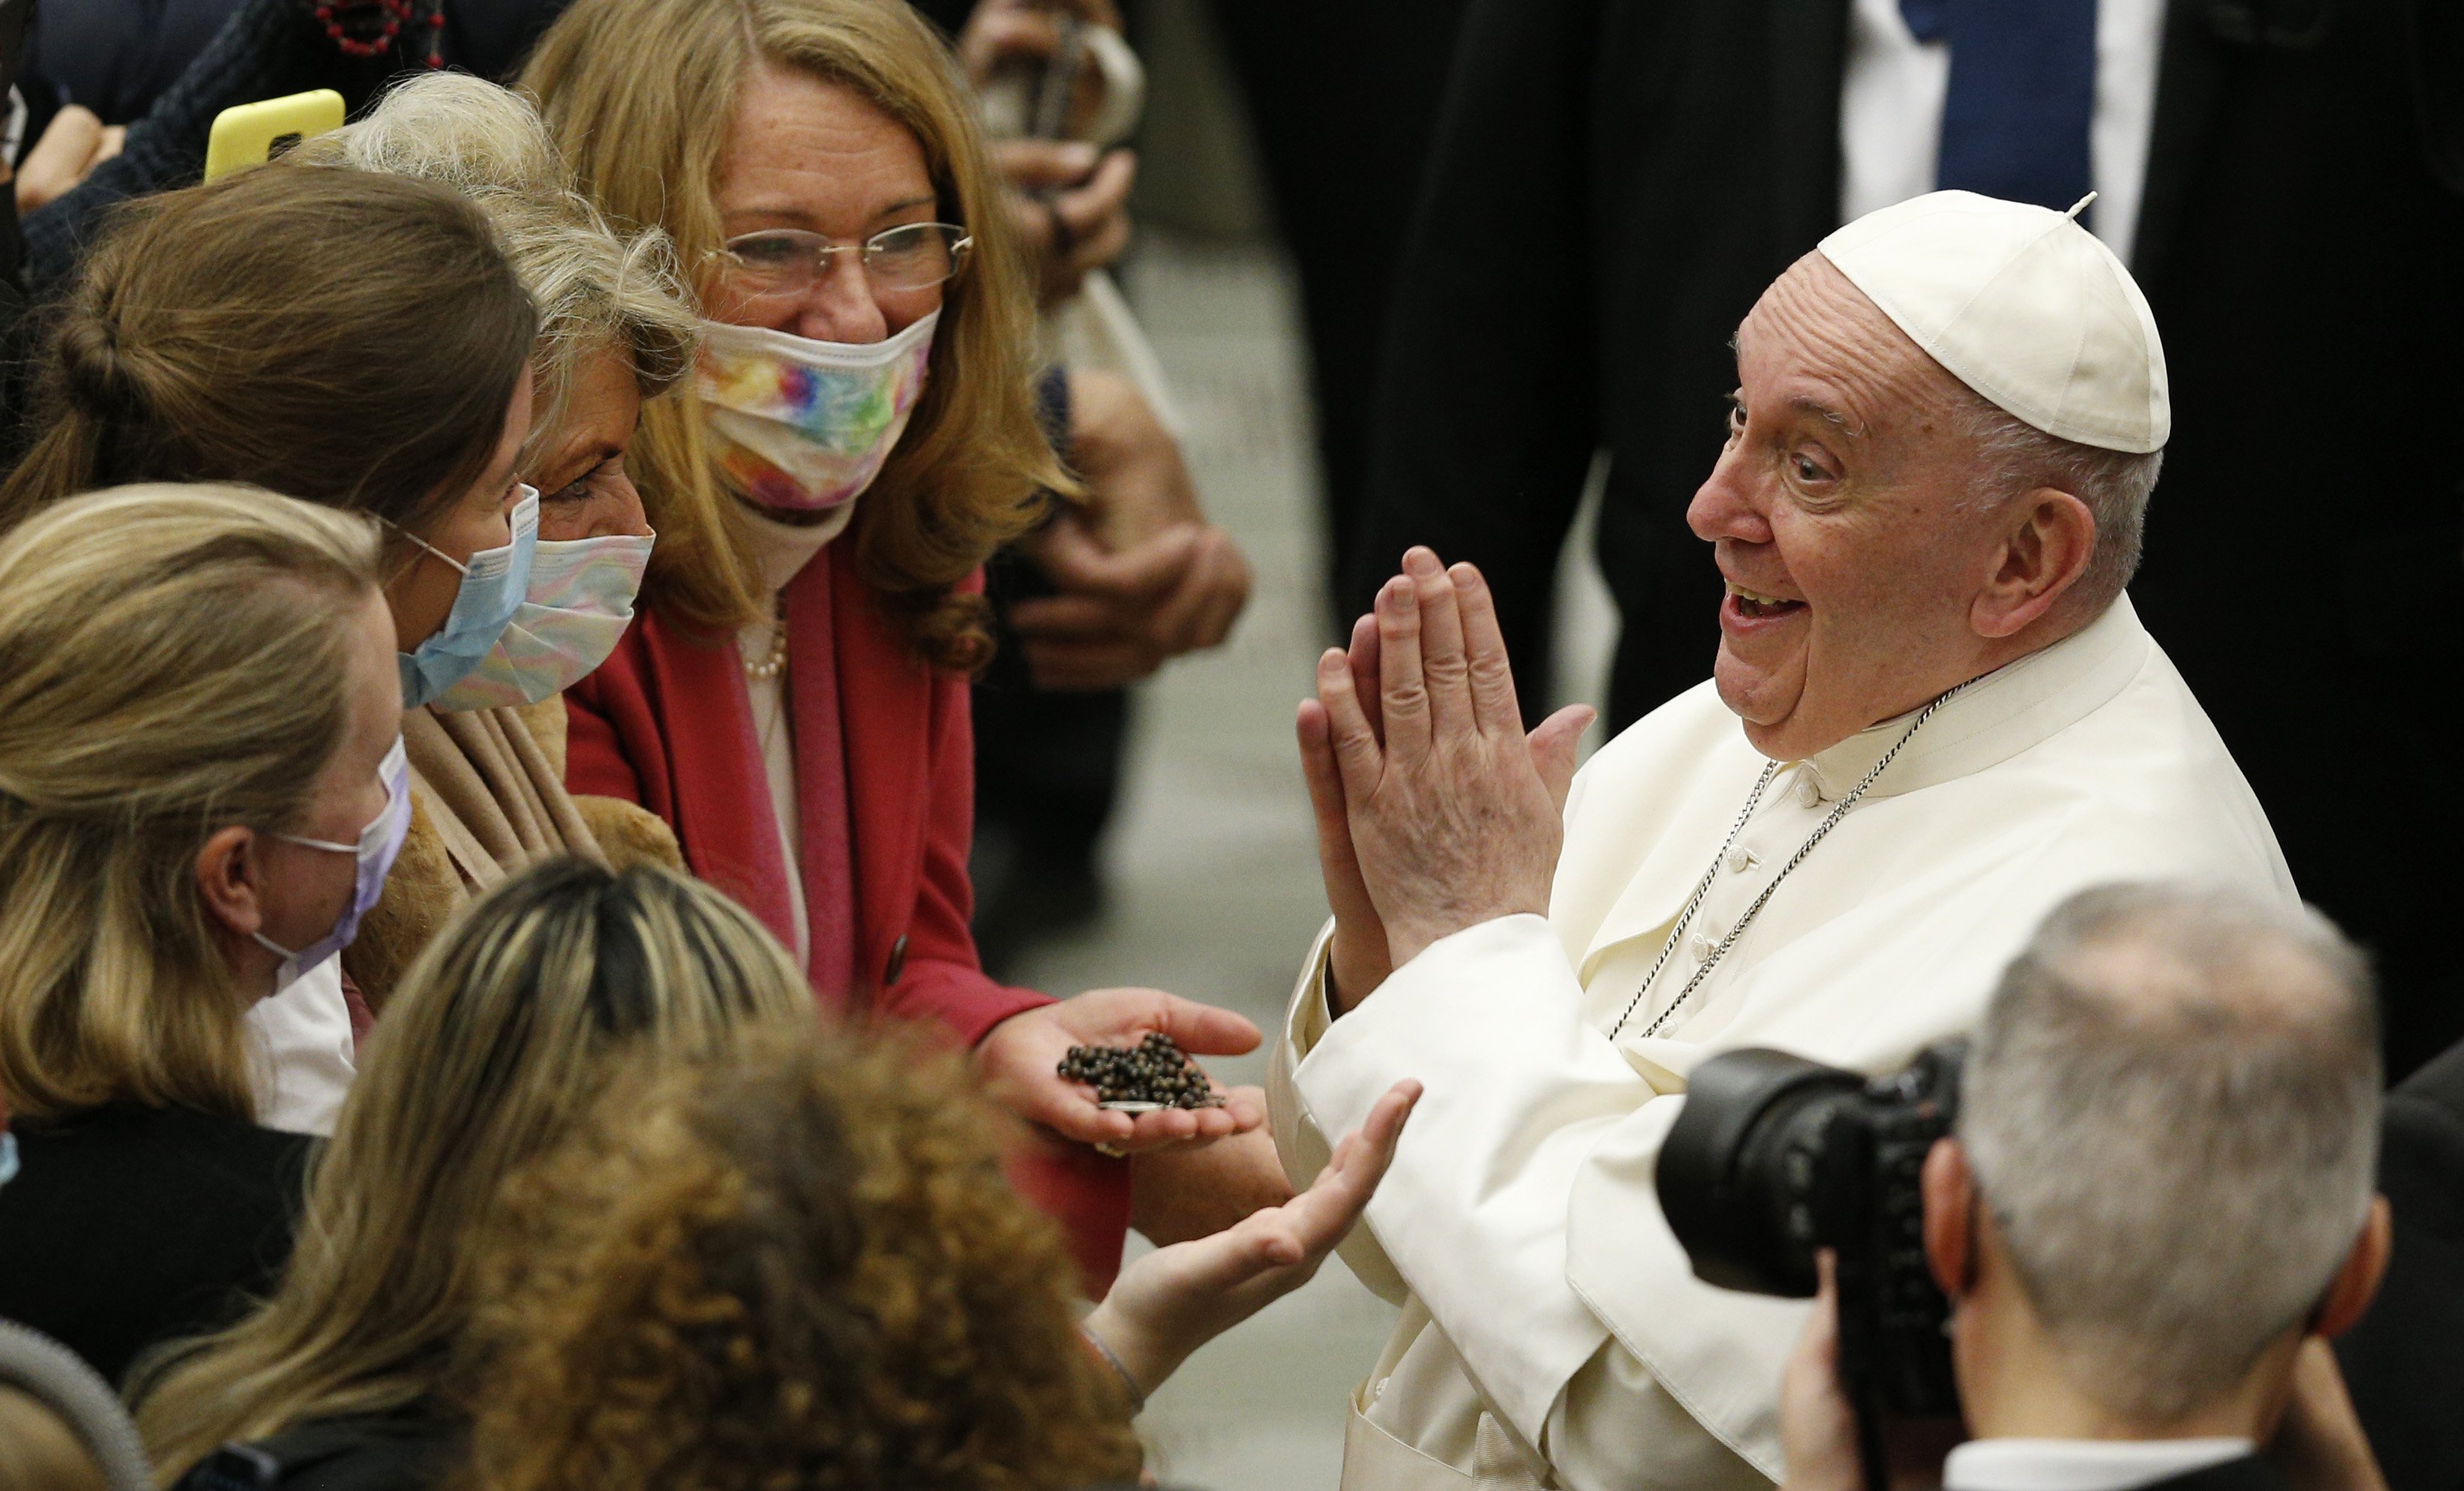 Pope Francis gestures as he greets people during his general audience in the Paul VI hall at the Vatican Jan. 5, 2022. (CNS photo/Paul Haring)